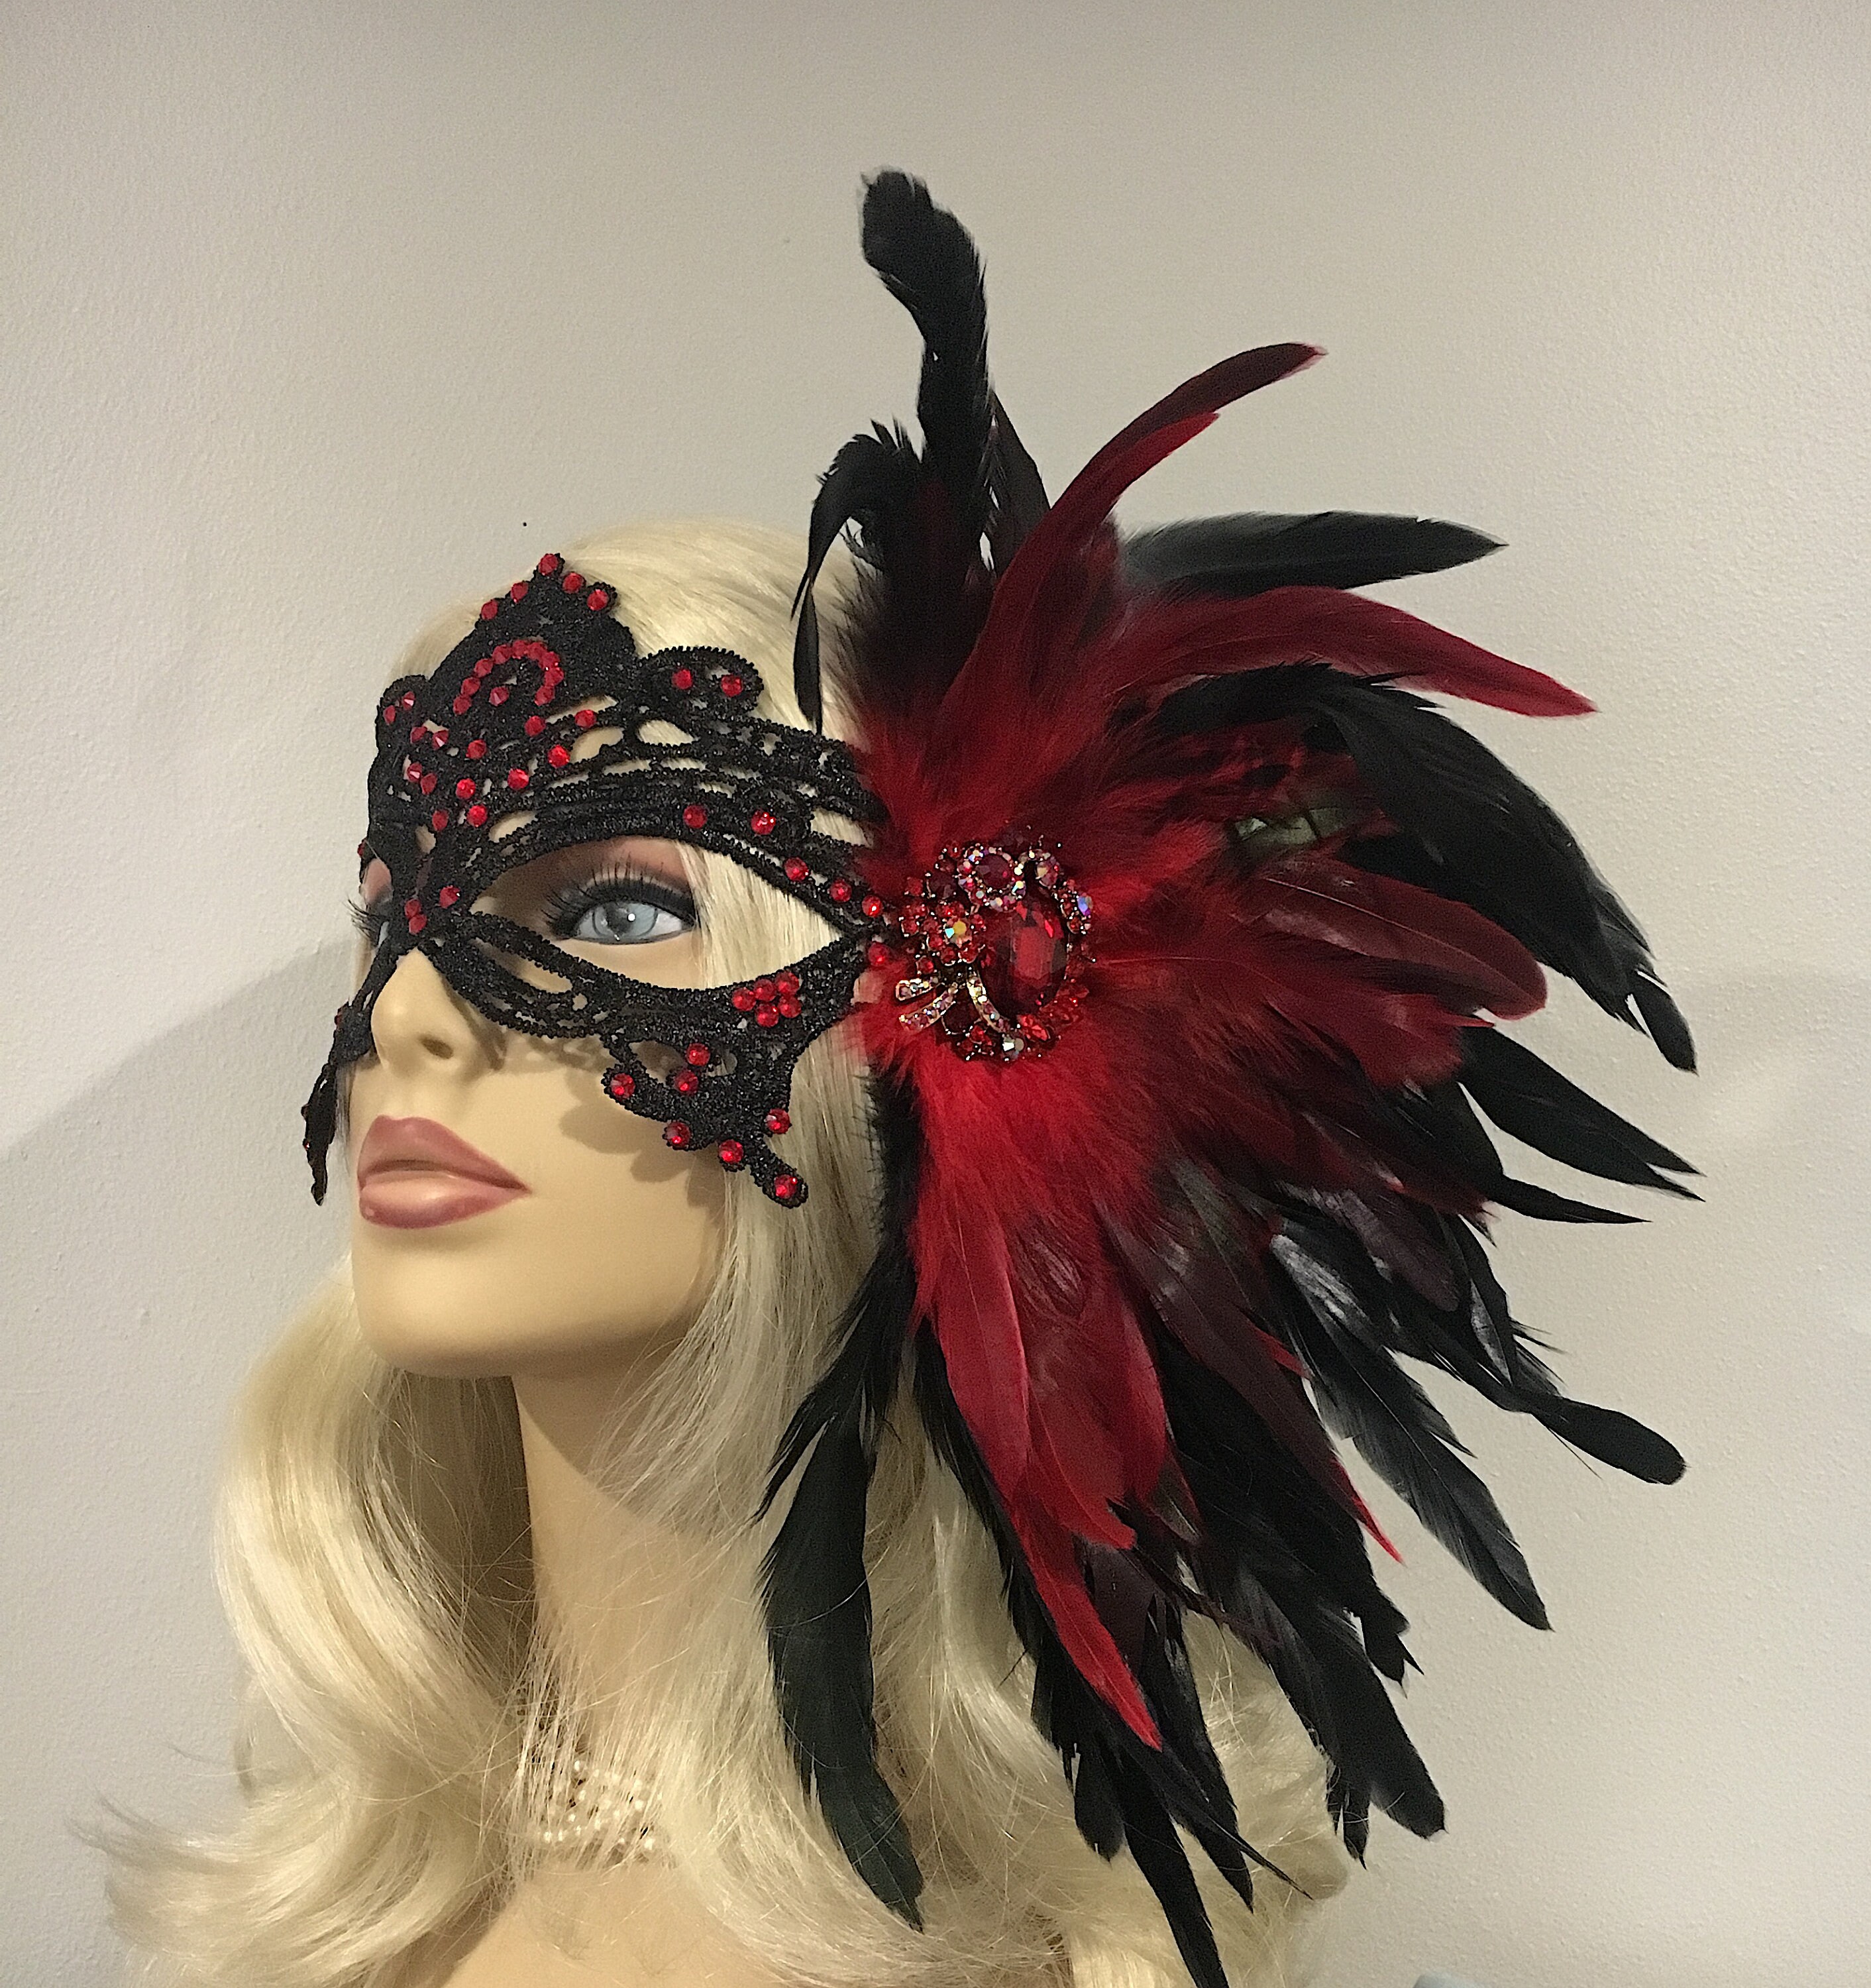 Black Lace Masquerade Mask With Black Feathers Masked Ball Women's Lace  Mask Wedding Masquerade Bridal Wedding Fall Festival Outfit 